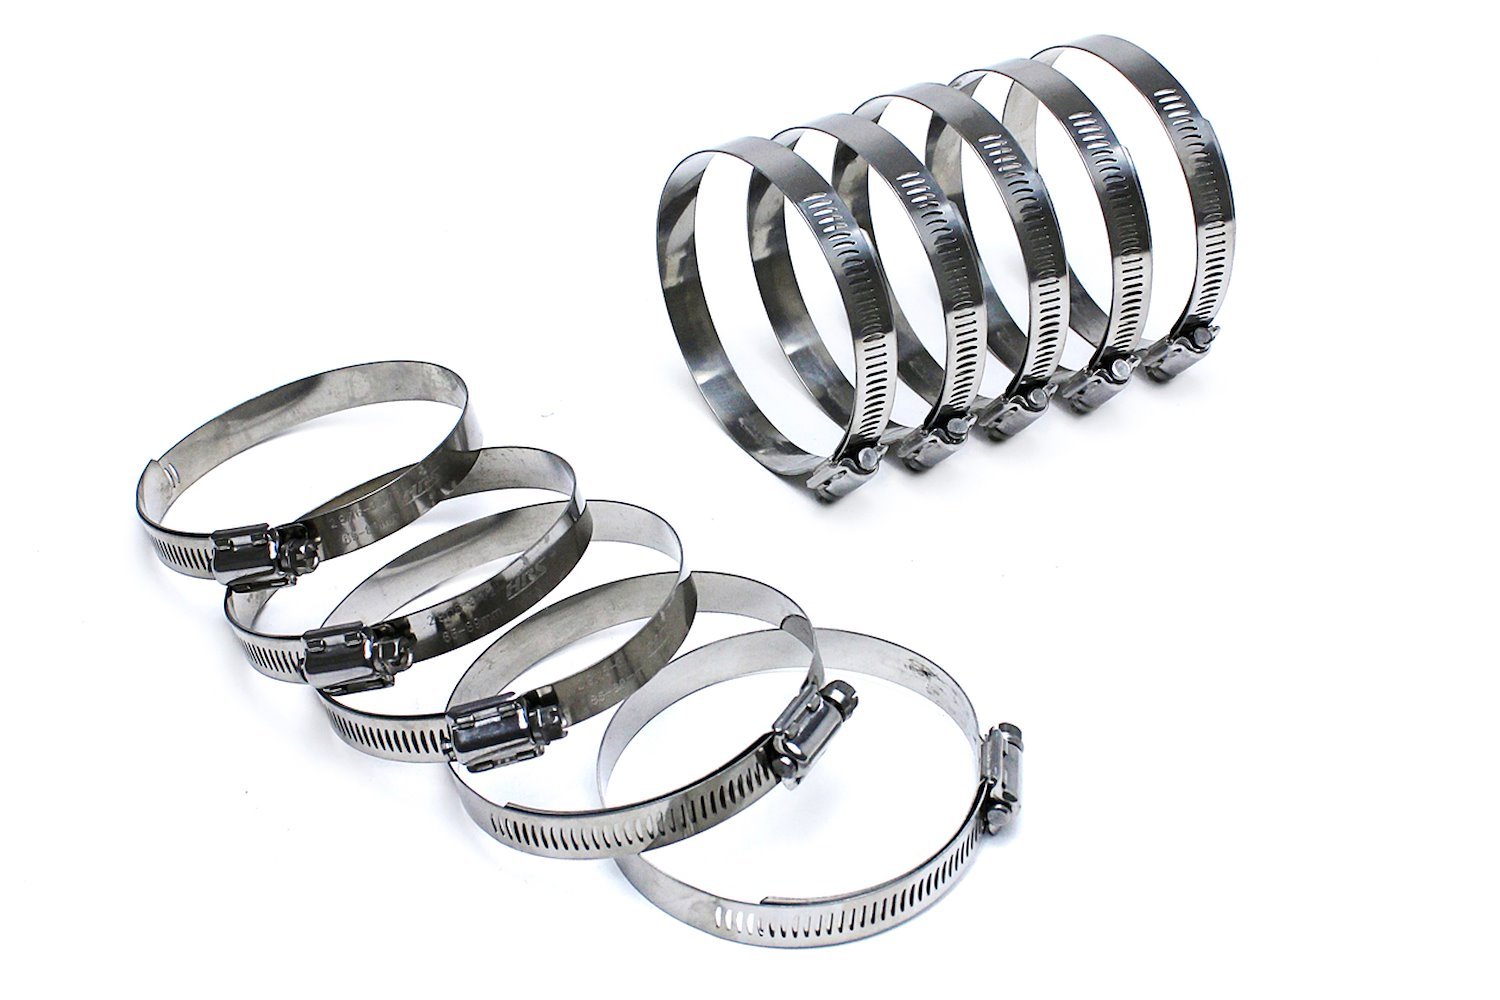 SSWC-91-114x10 Stainless Steel Worm Gear Hose Clamp, Effective Range: 3-9/16 in.- 4-1/2 in., 10Pc